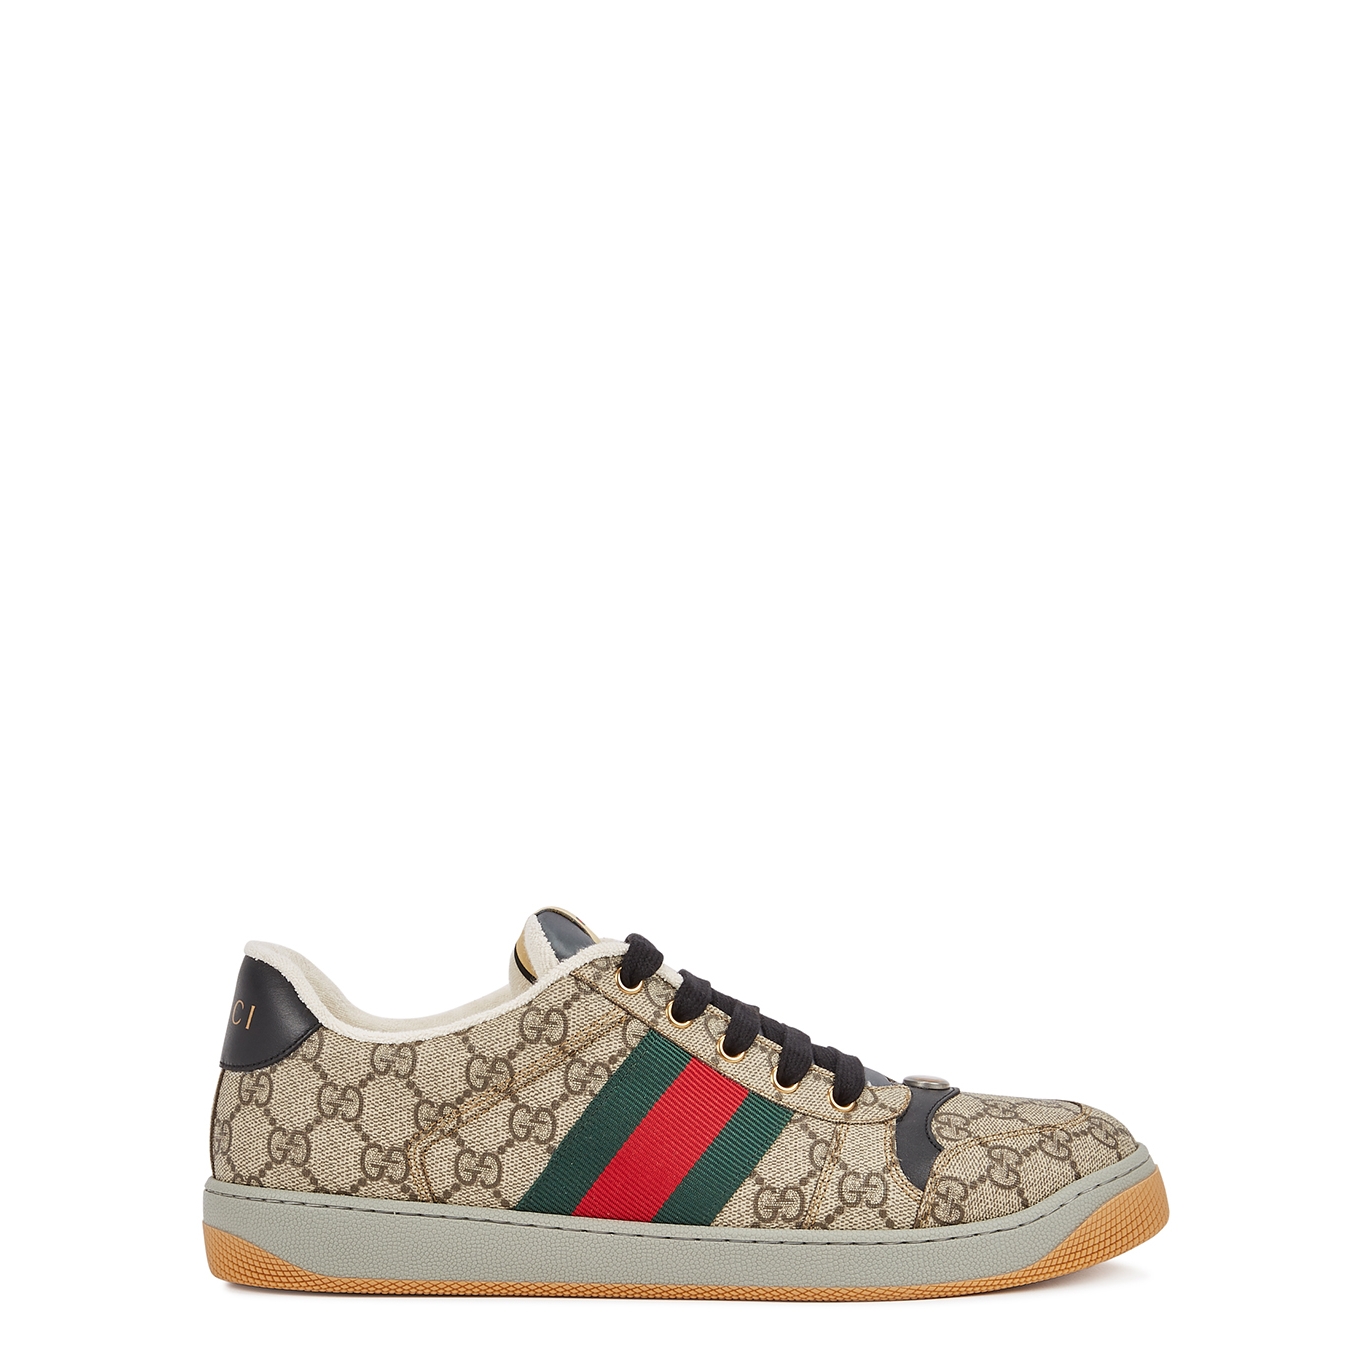 Gucci Screener GG Logo Taupe Leather Sneakers - 8, Gucci Trainers, Genuine Leather - 8